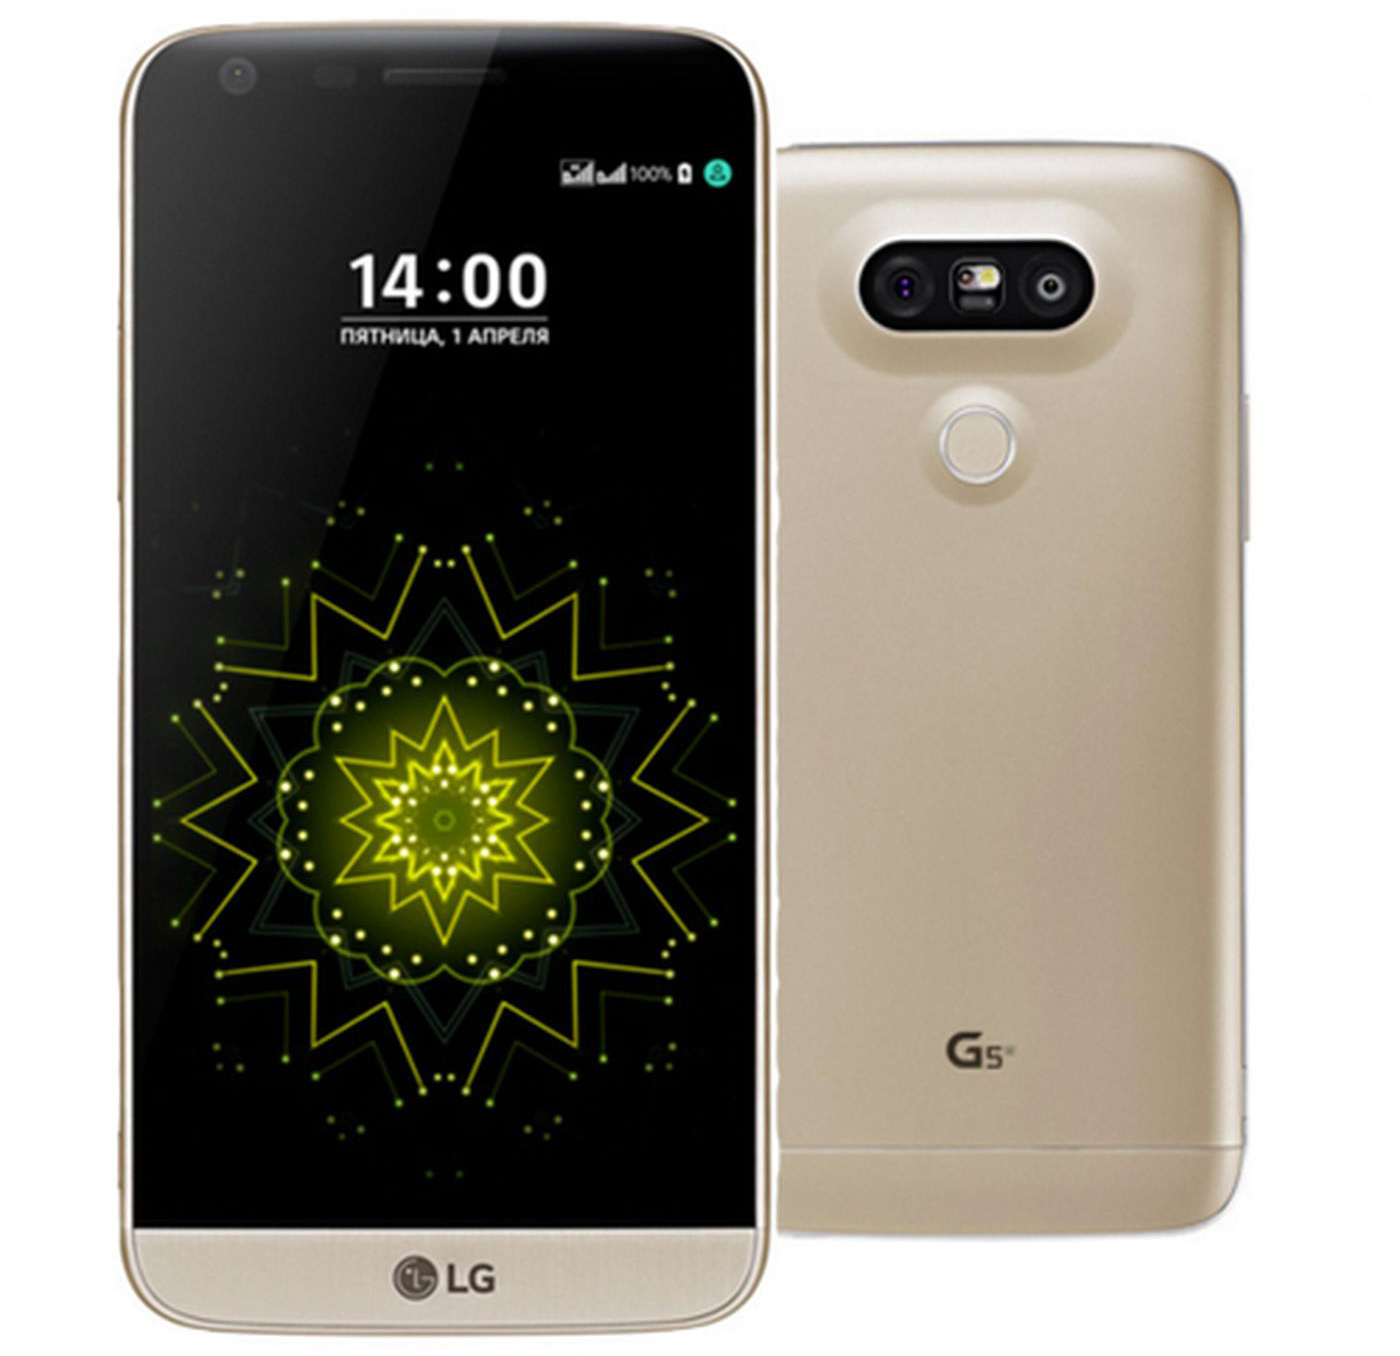 Primary image for LG G5 H860n 4gb 32gb octa-core 16mp fingerprint id 5.3" android smartphone gold